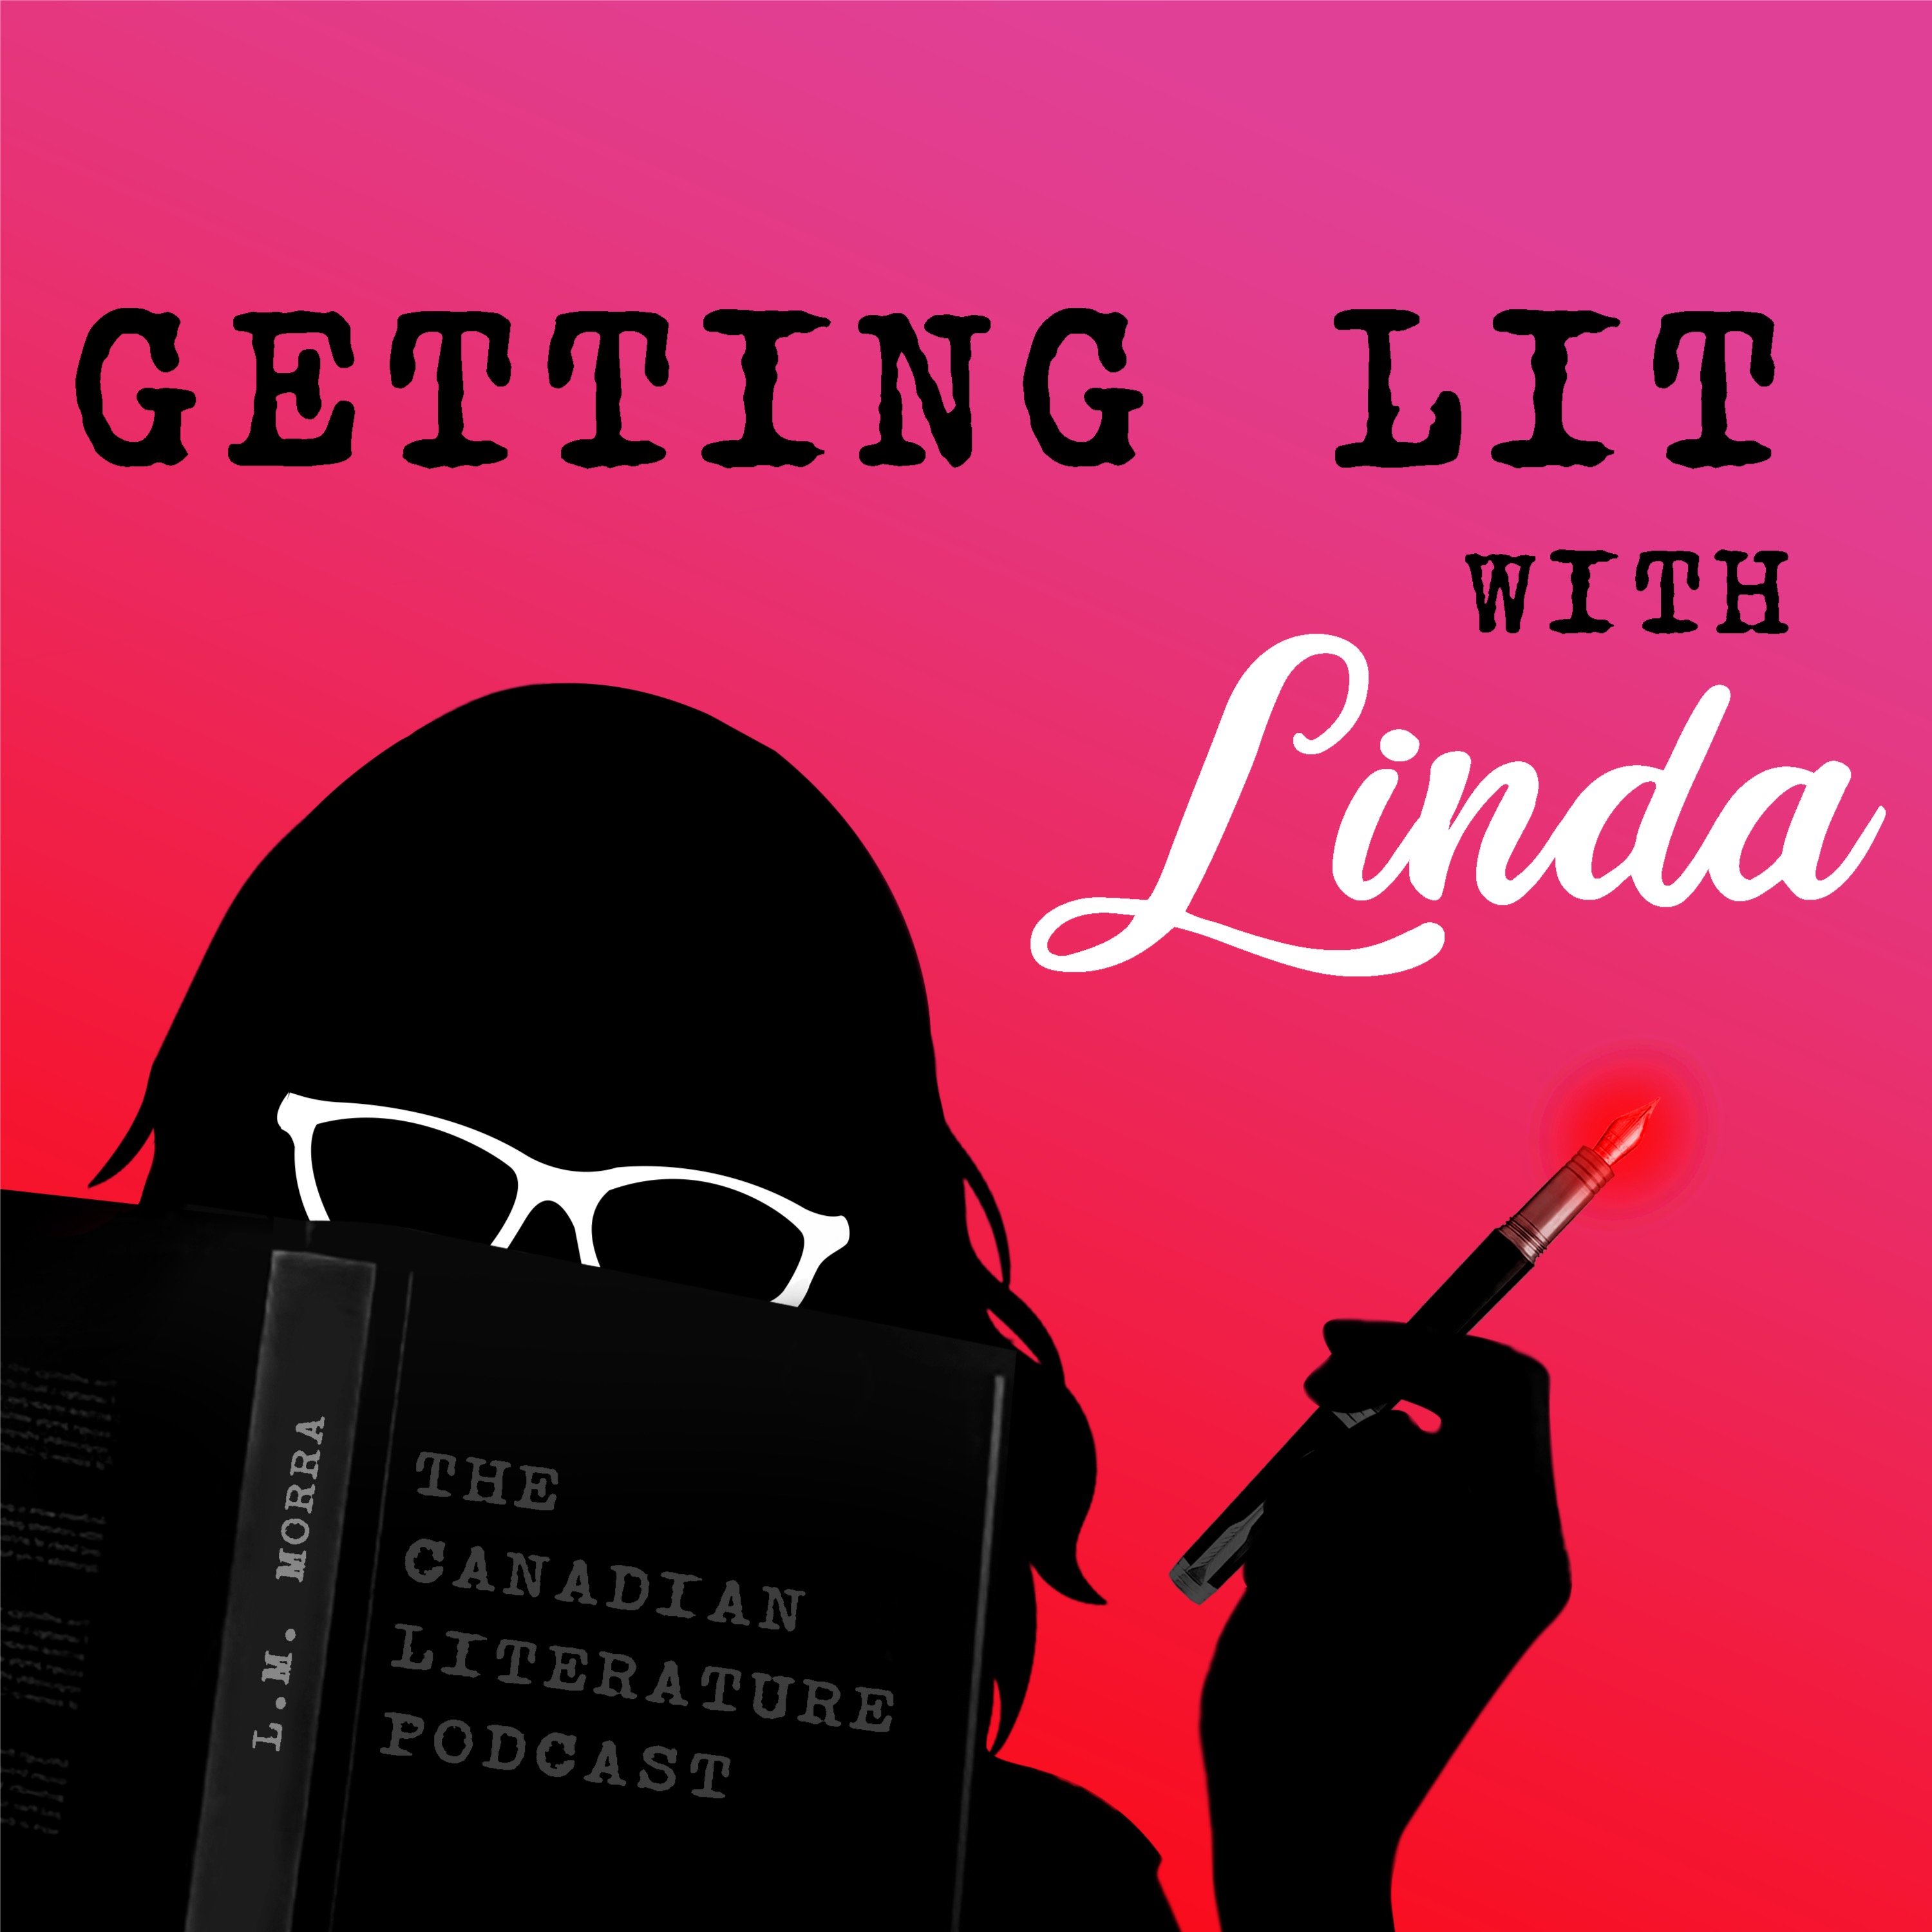 Getting Lit with Linda - The Canadian Literature Podcast